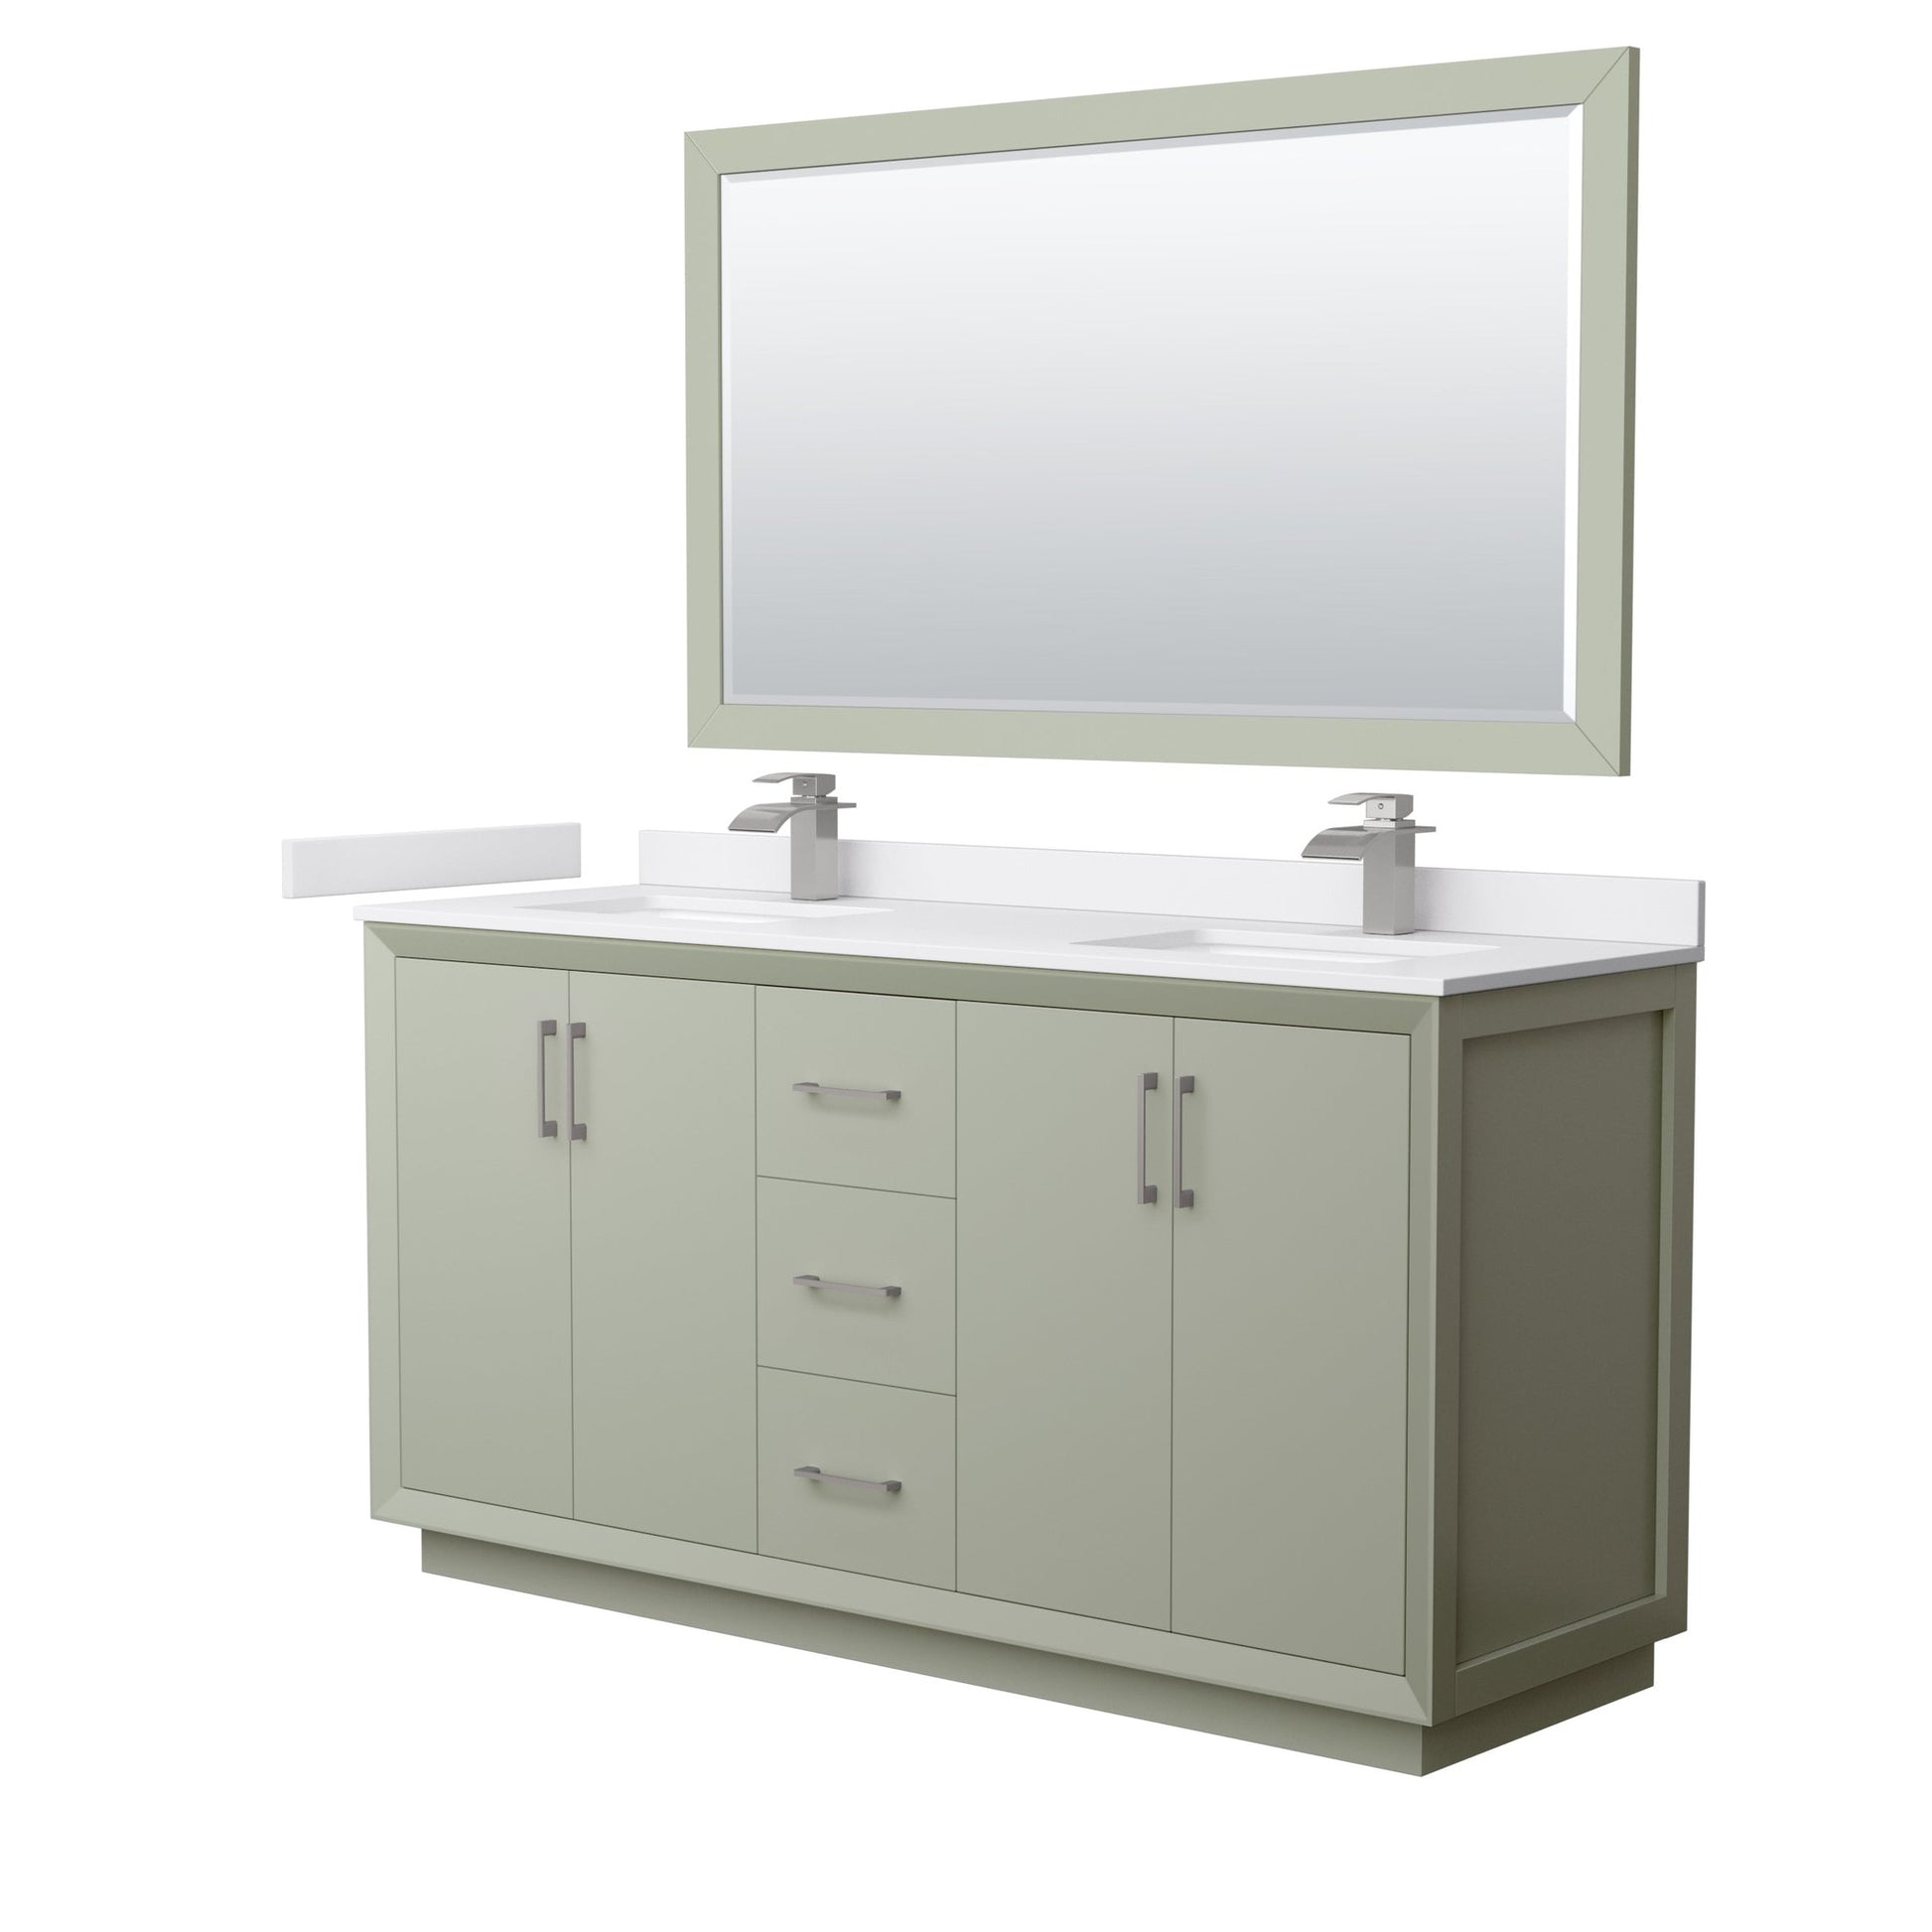 Wyndham Collection Strada 66" Double Bathroom Vanity in Light Green, White Cultured Marble Countertop, Undermount Square Sinks, Brushed Nickel Trim, 58" Mirror